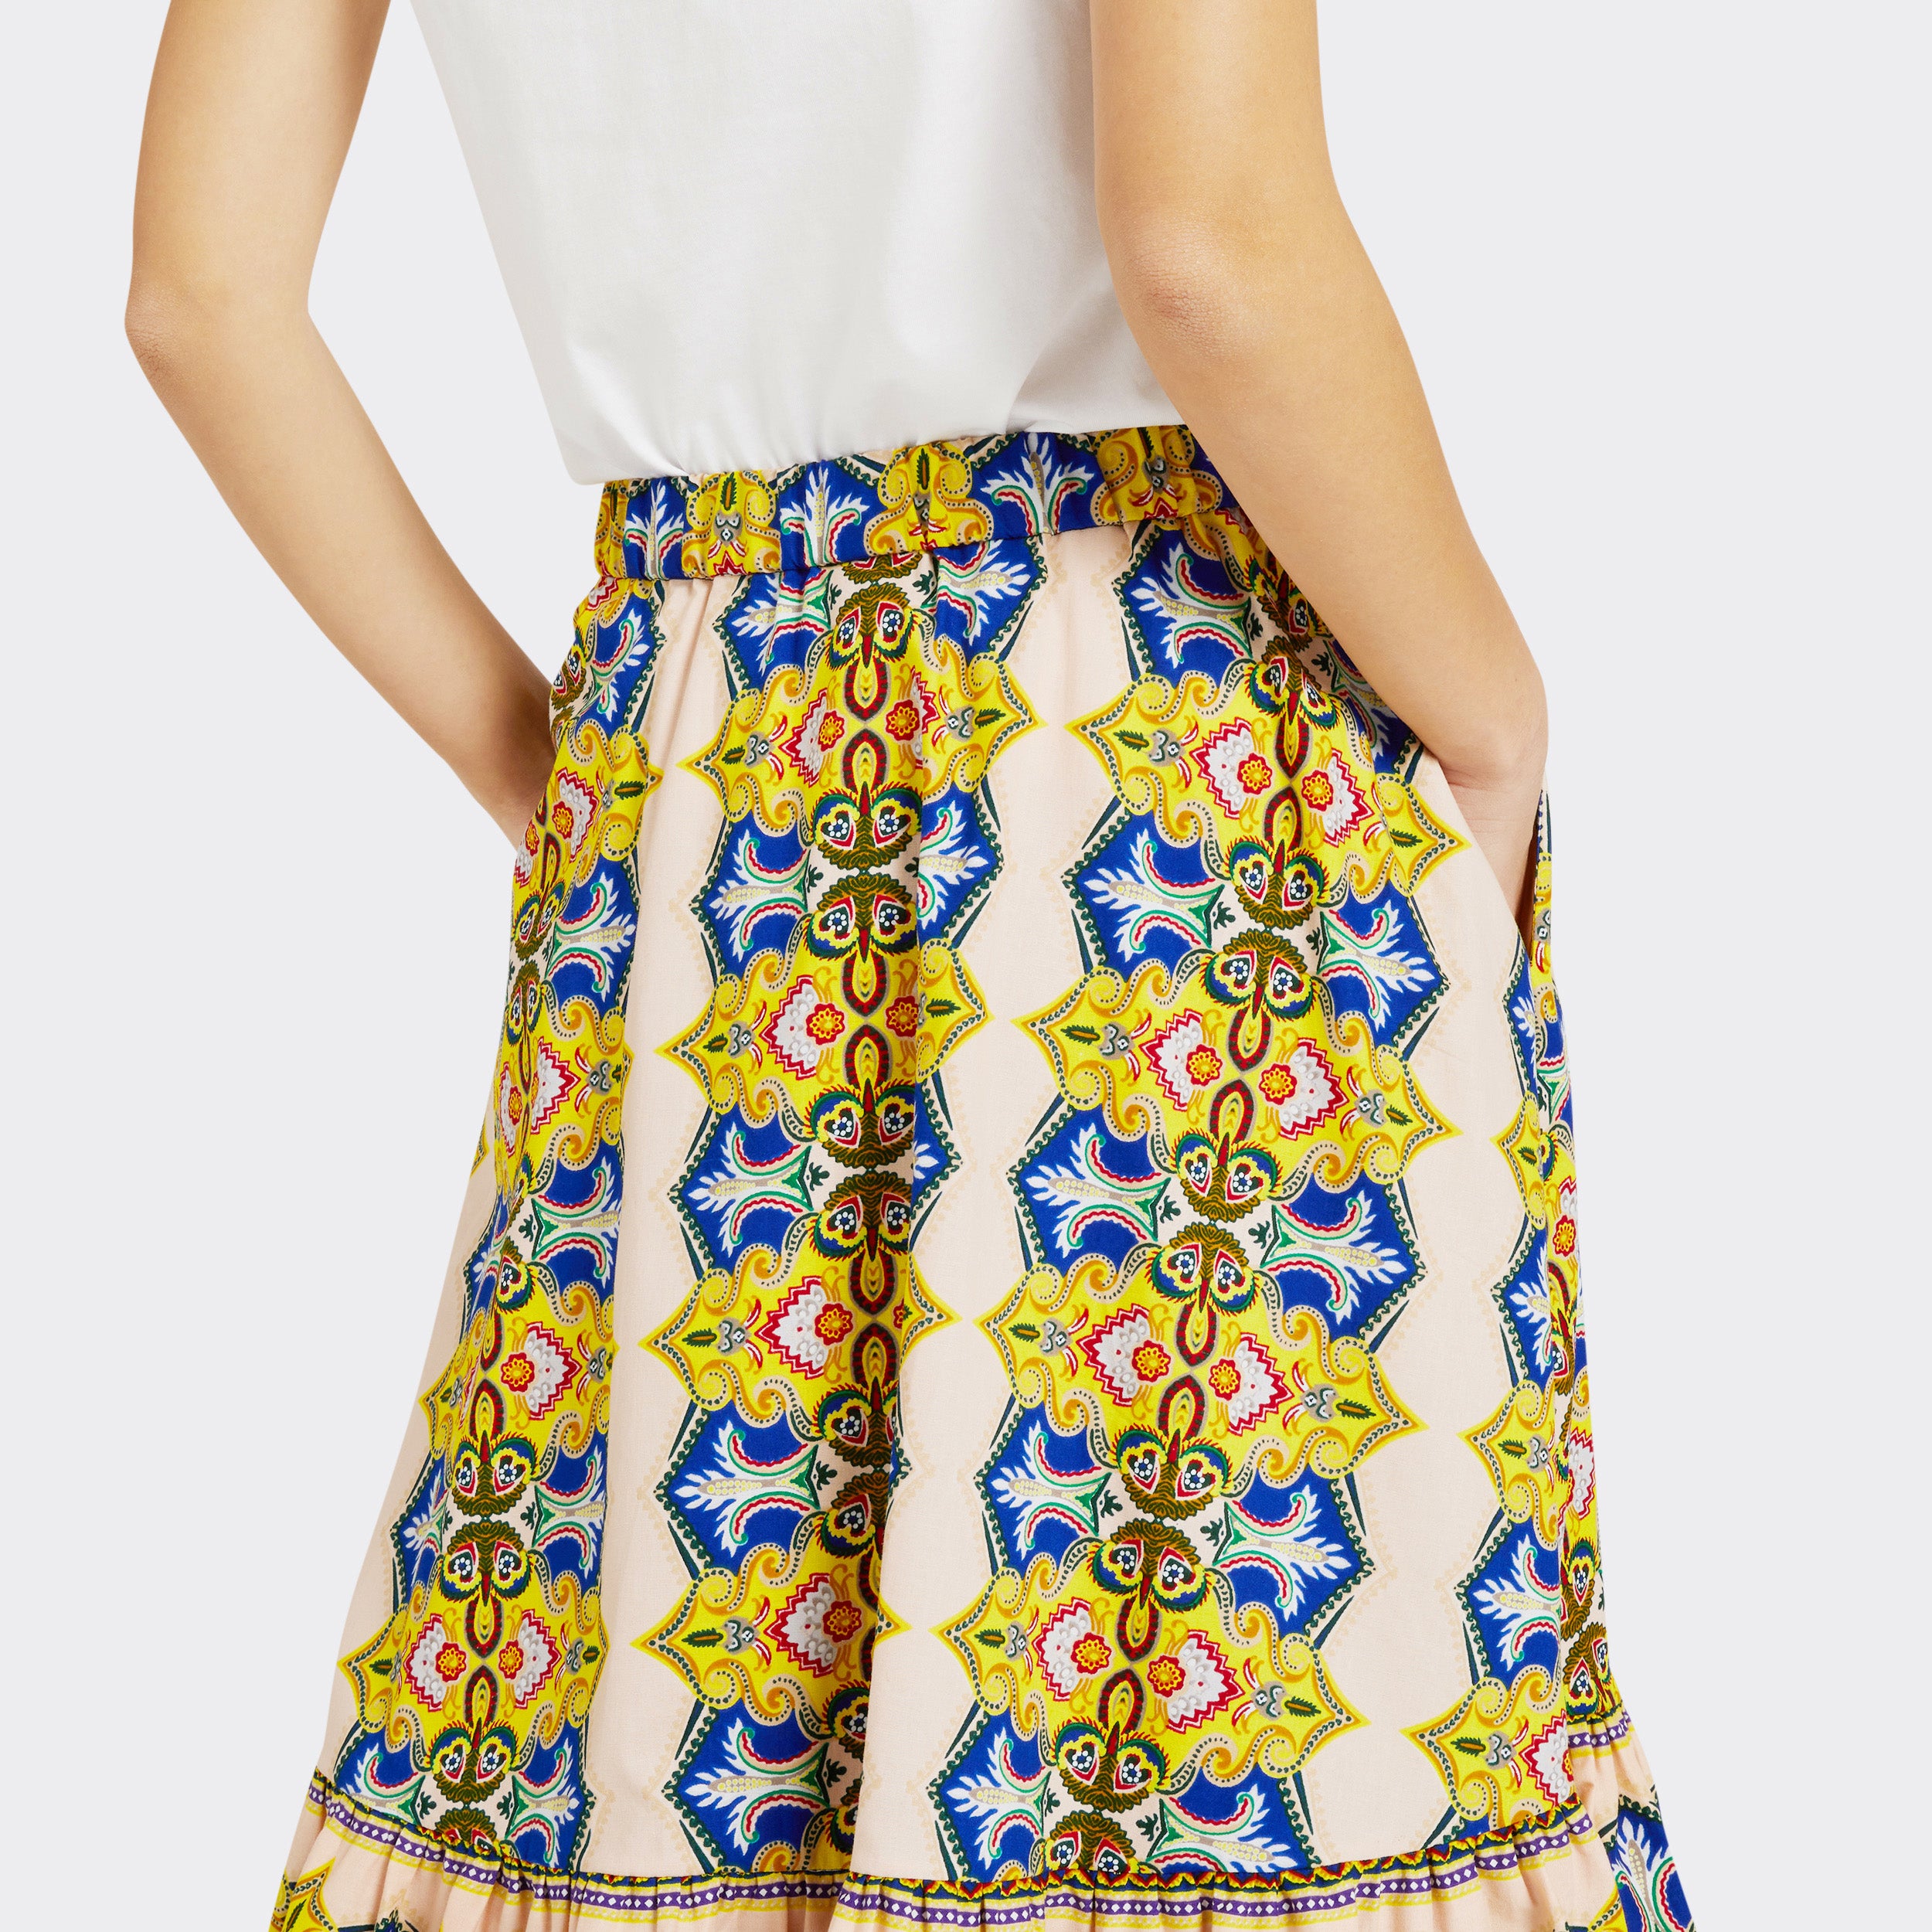 Model wears Flounced Maxi Skirt in Wax Magic Mosaic with colors yellow and blue, you can see the pocket detail, with a plain white tank top.